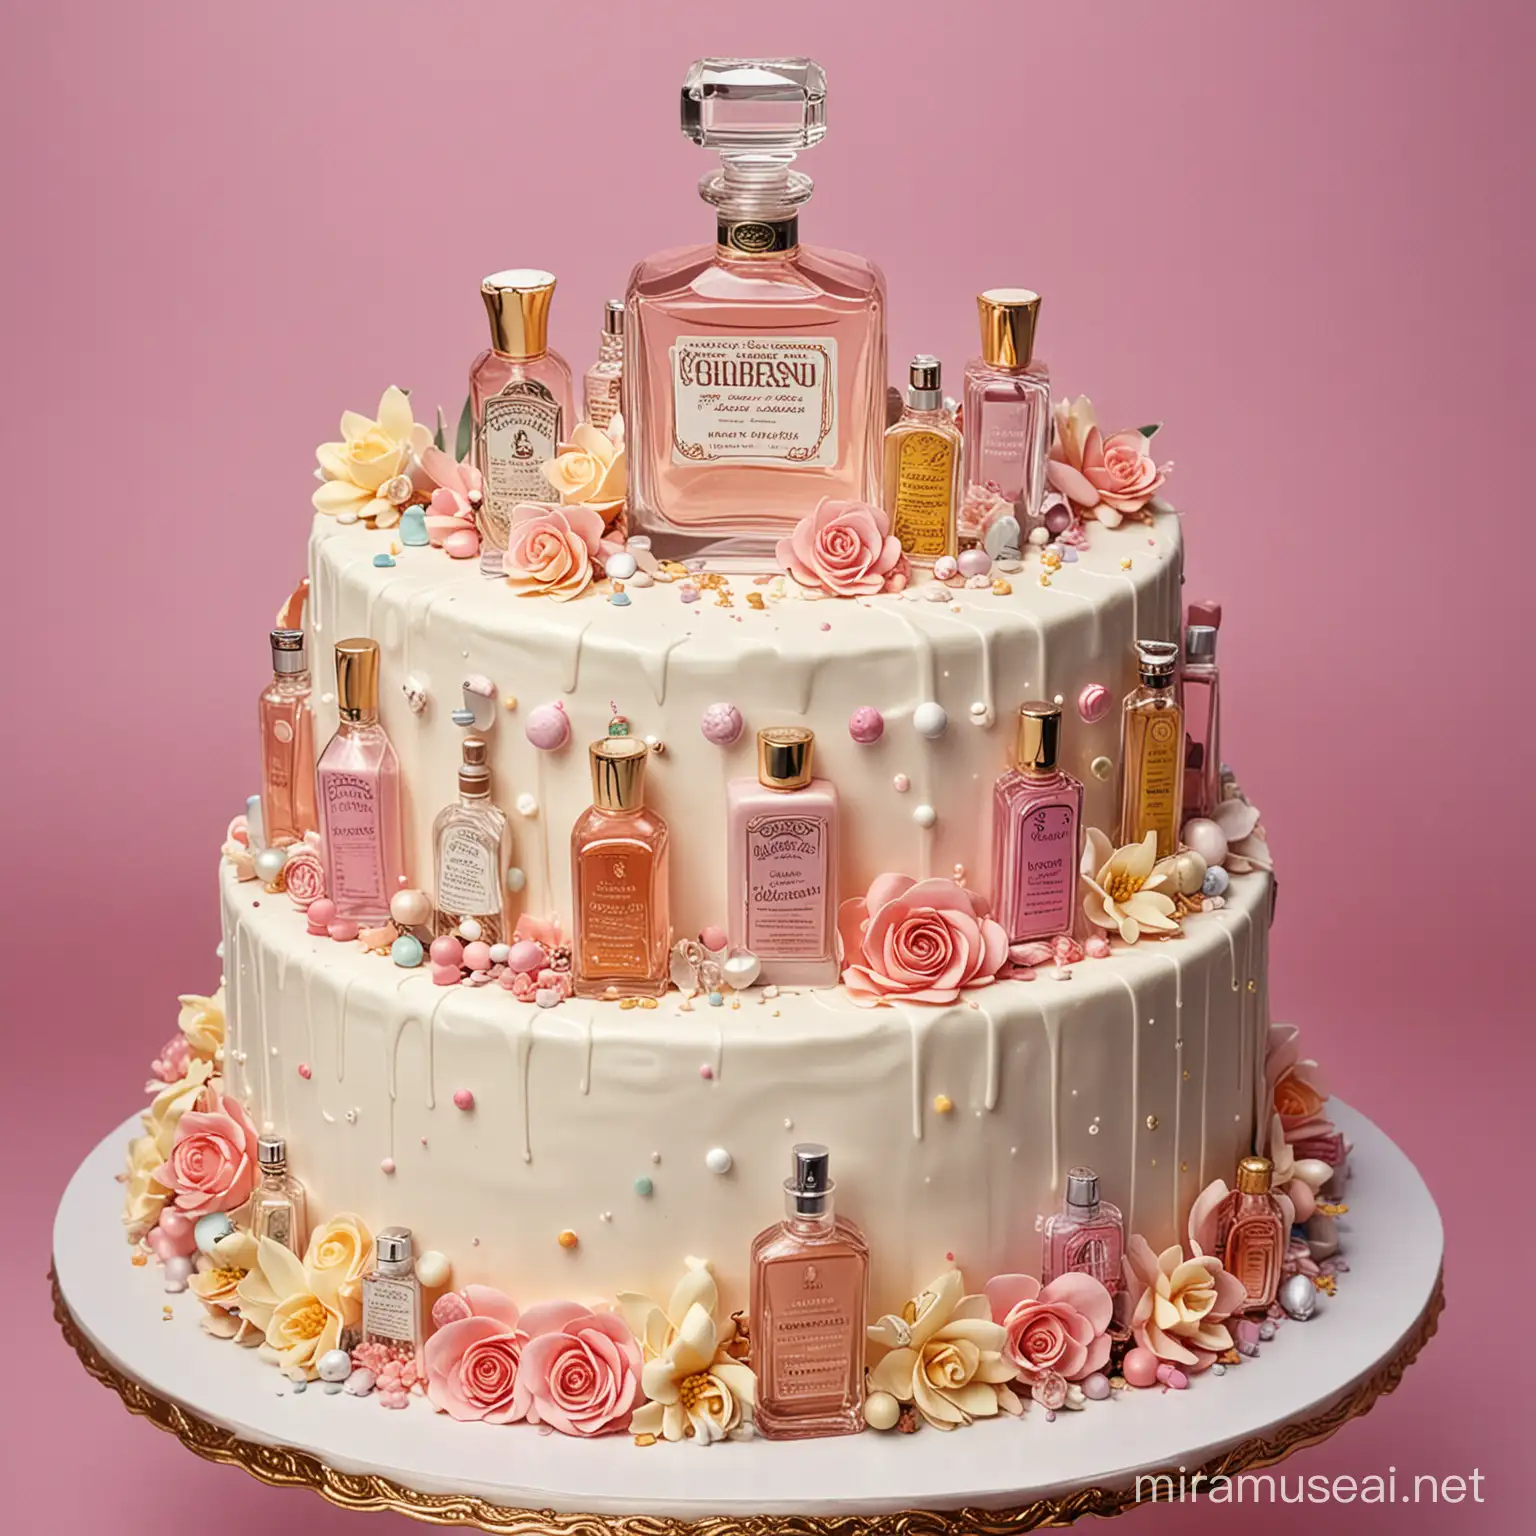 A cake decorated with multiple bottles of parfume